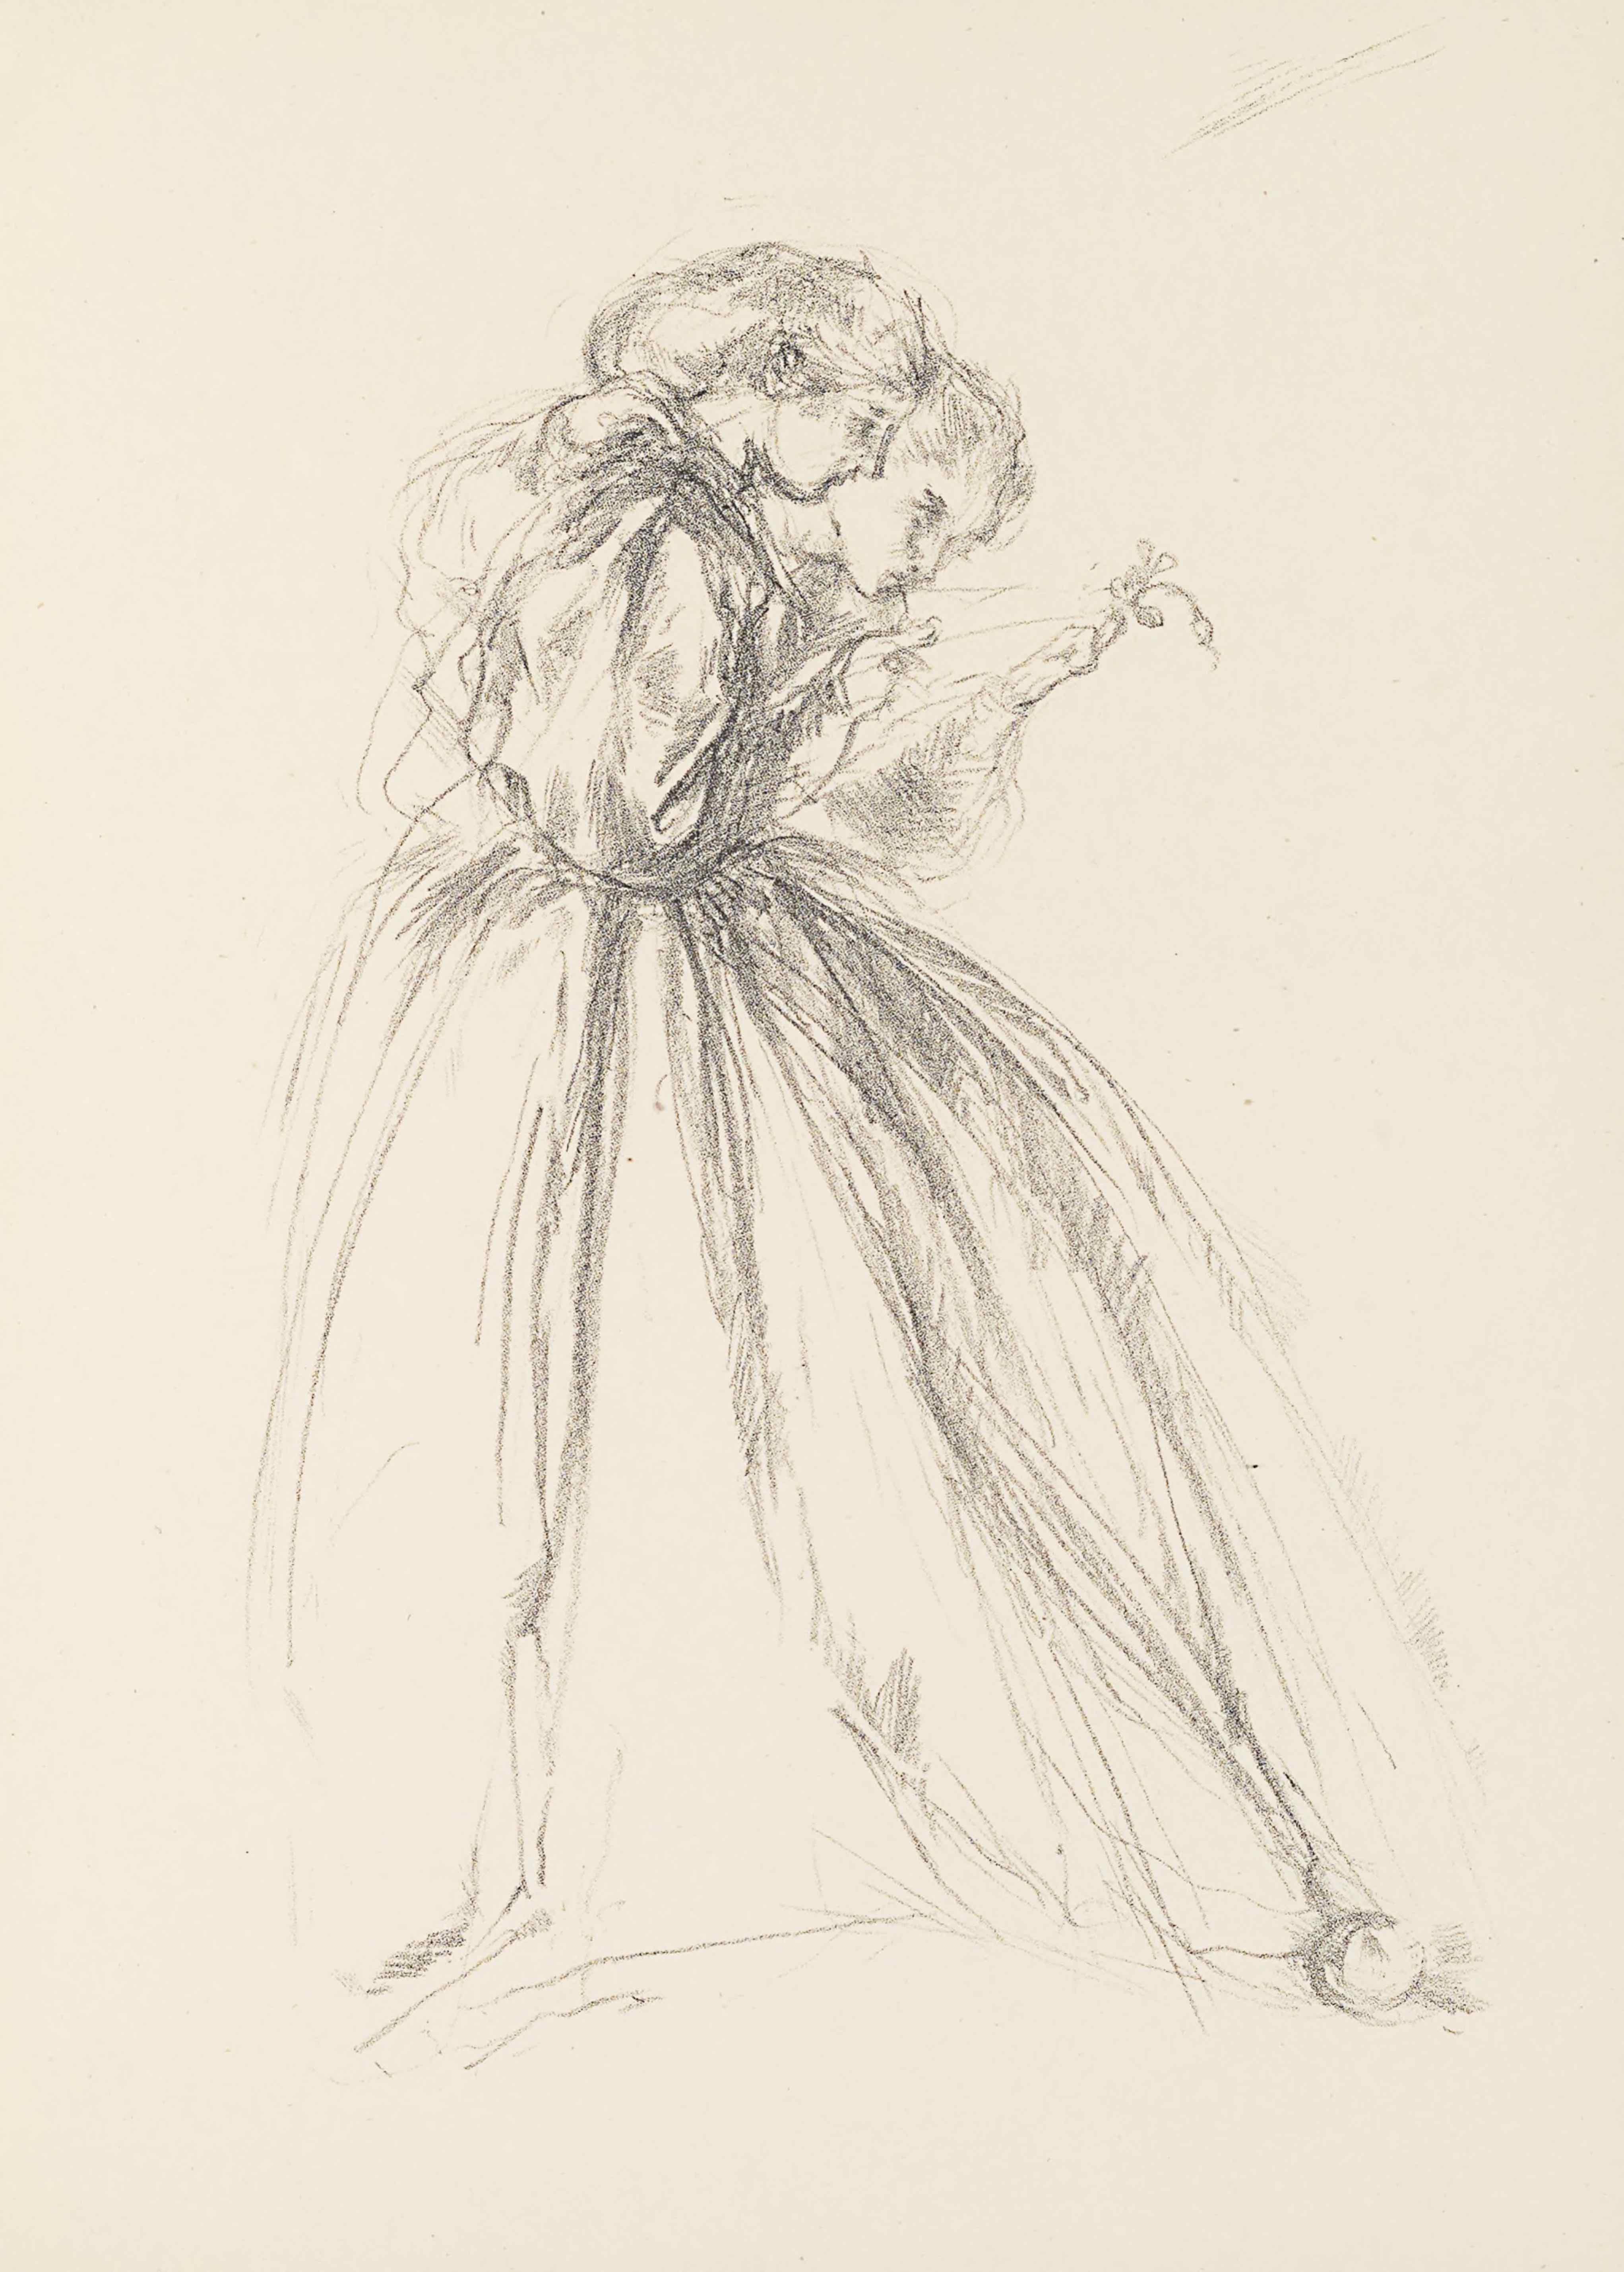 A portrait-oriented lithograph of two full-length female figures leaning forward in profile, apparently examining a piece of paper. With sketch-like strokes the women are centered in the page and face to the right with only their side facial profiles visible. The woman in the foreground is dressed in a large long-sleeve gown that has a full skirt taking up a large portion of the bottom half of the page. Her hair is pulled back in a sort of low ponytail or bun. The woman behind is only visible by her head and outstretched arm. Her gaze is focused downwards, with her head at a more severe tilt than the woman in the foreground. They both look down at the hand of the woman in the background, which appears to be holding a piece of paper and a small plant. The woman in front points towards the object with her right hand.